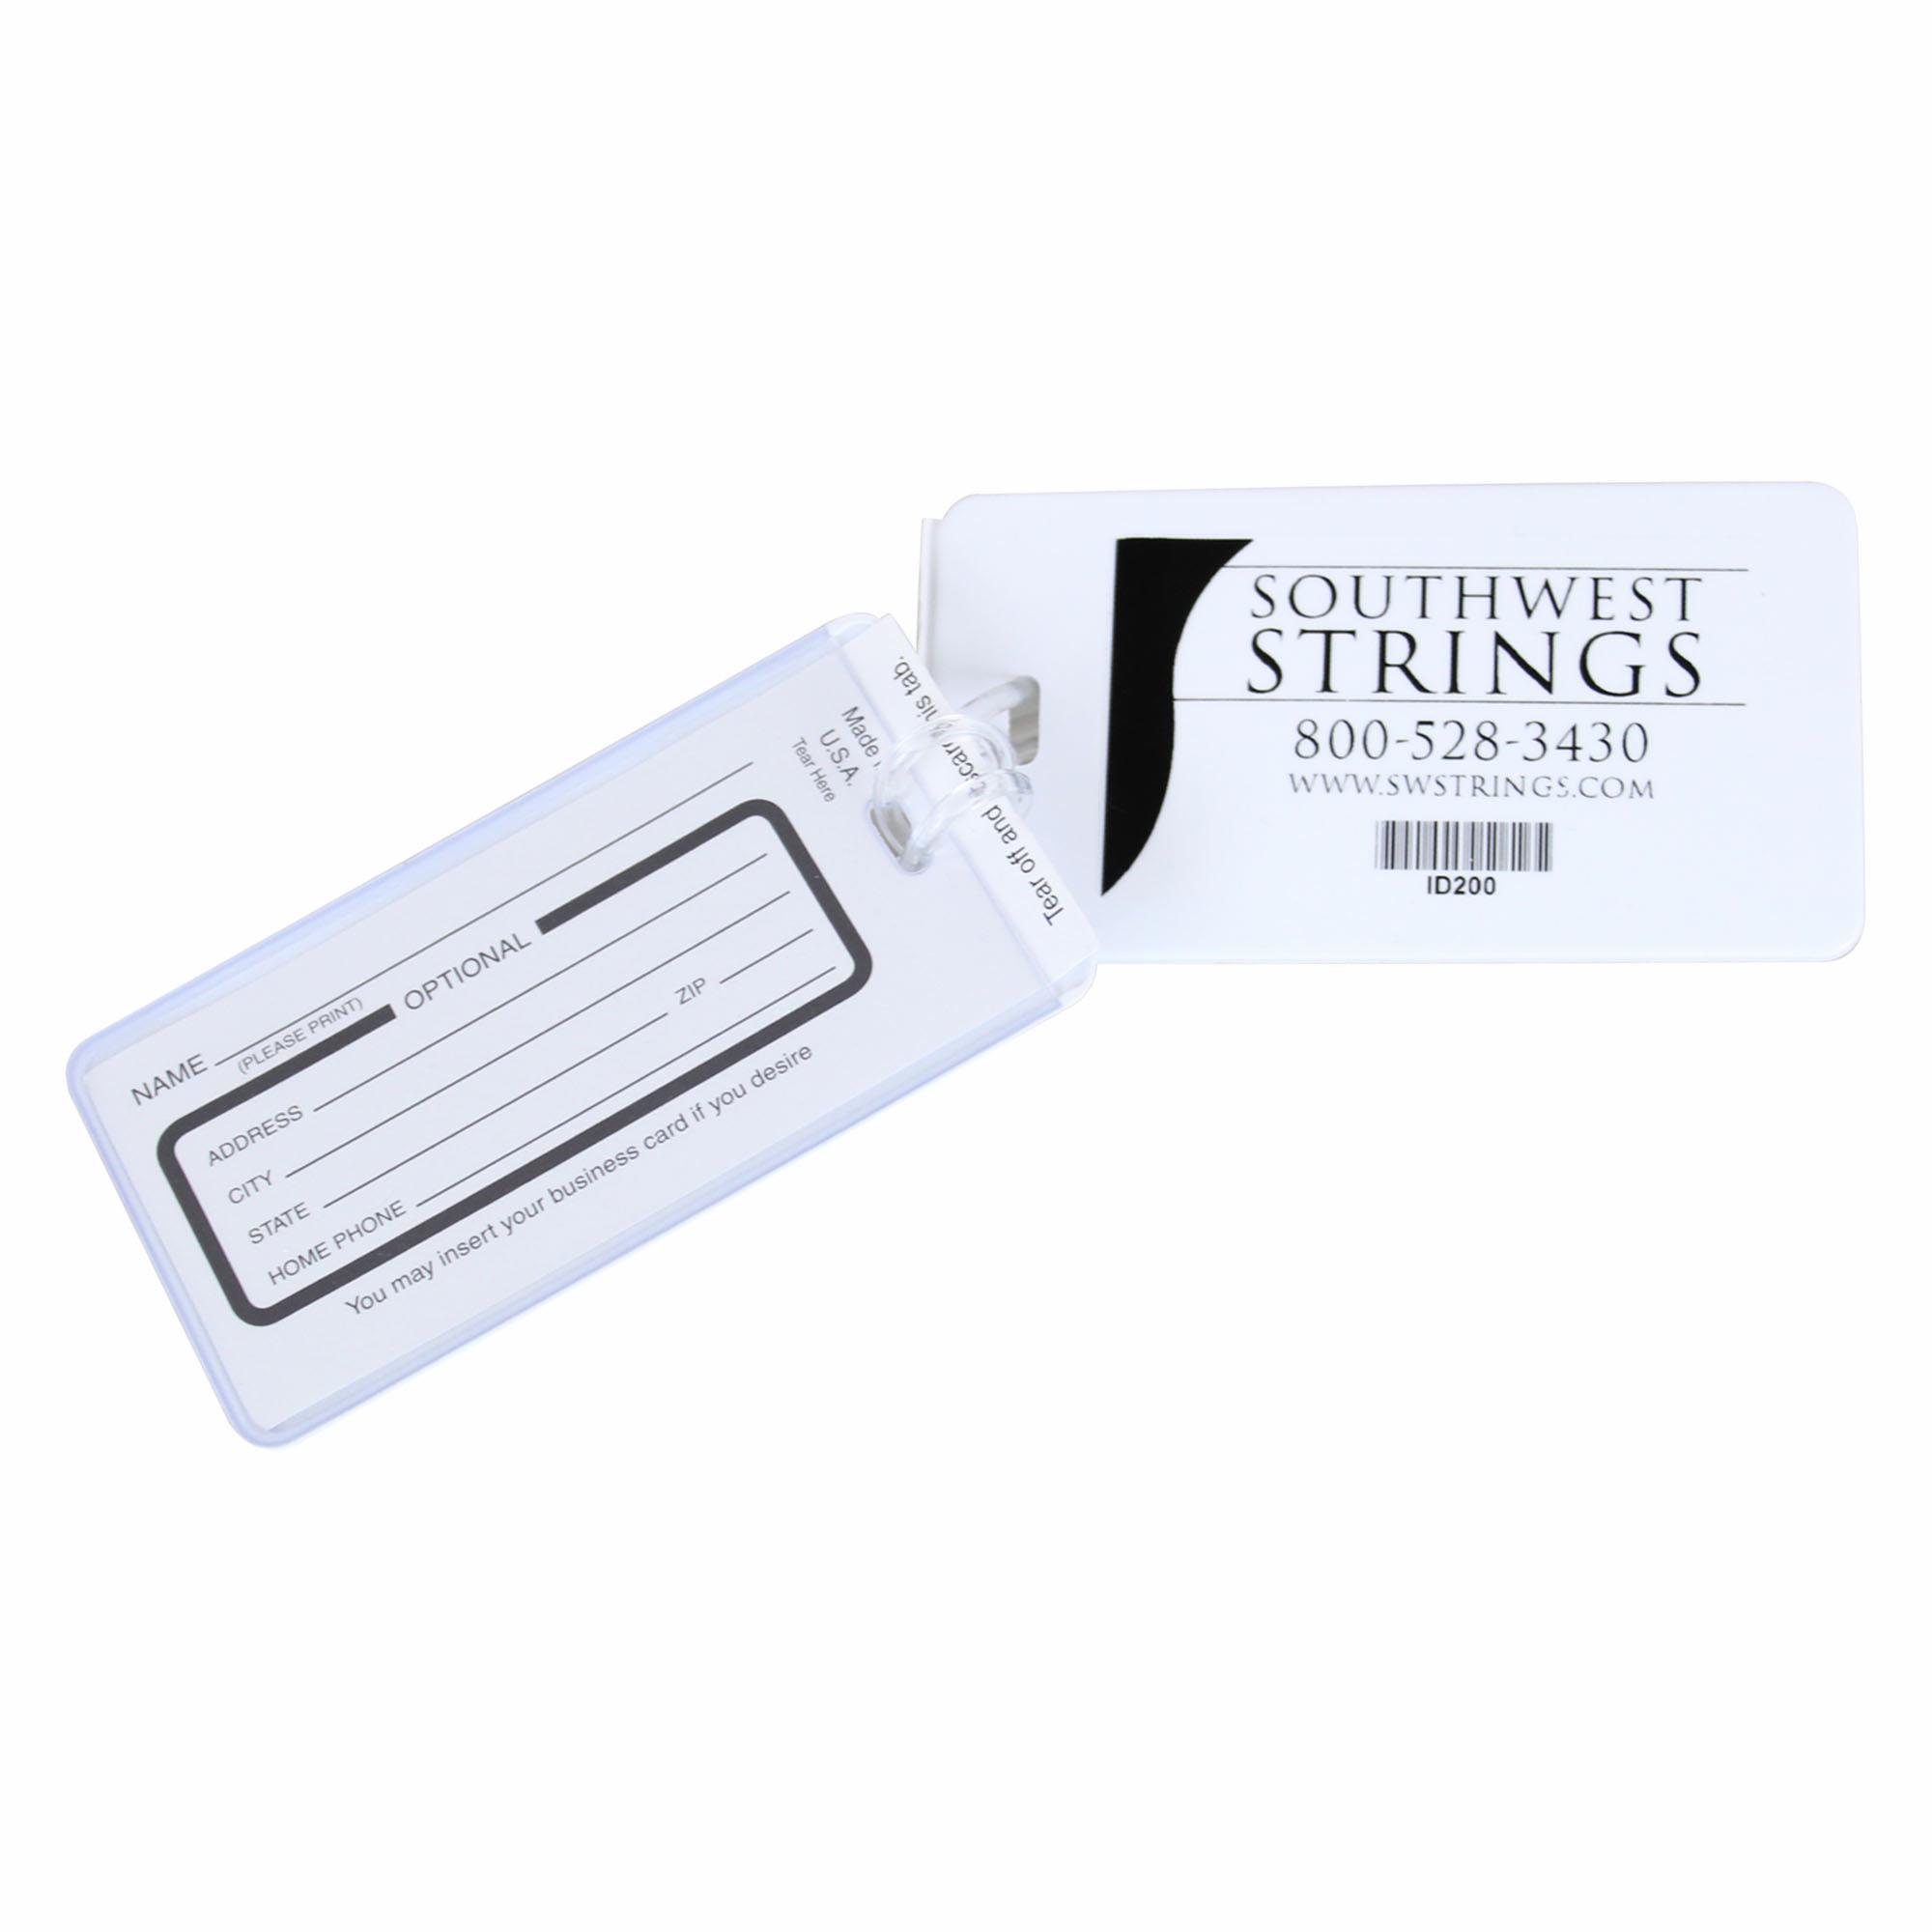 Case ID Tag, Southwest Strings